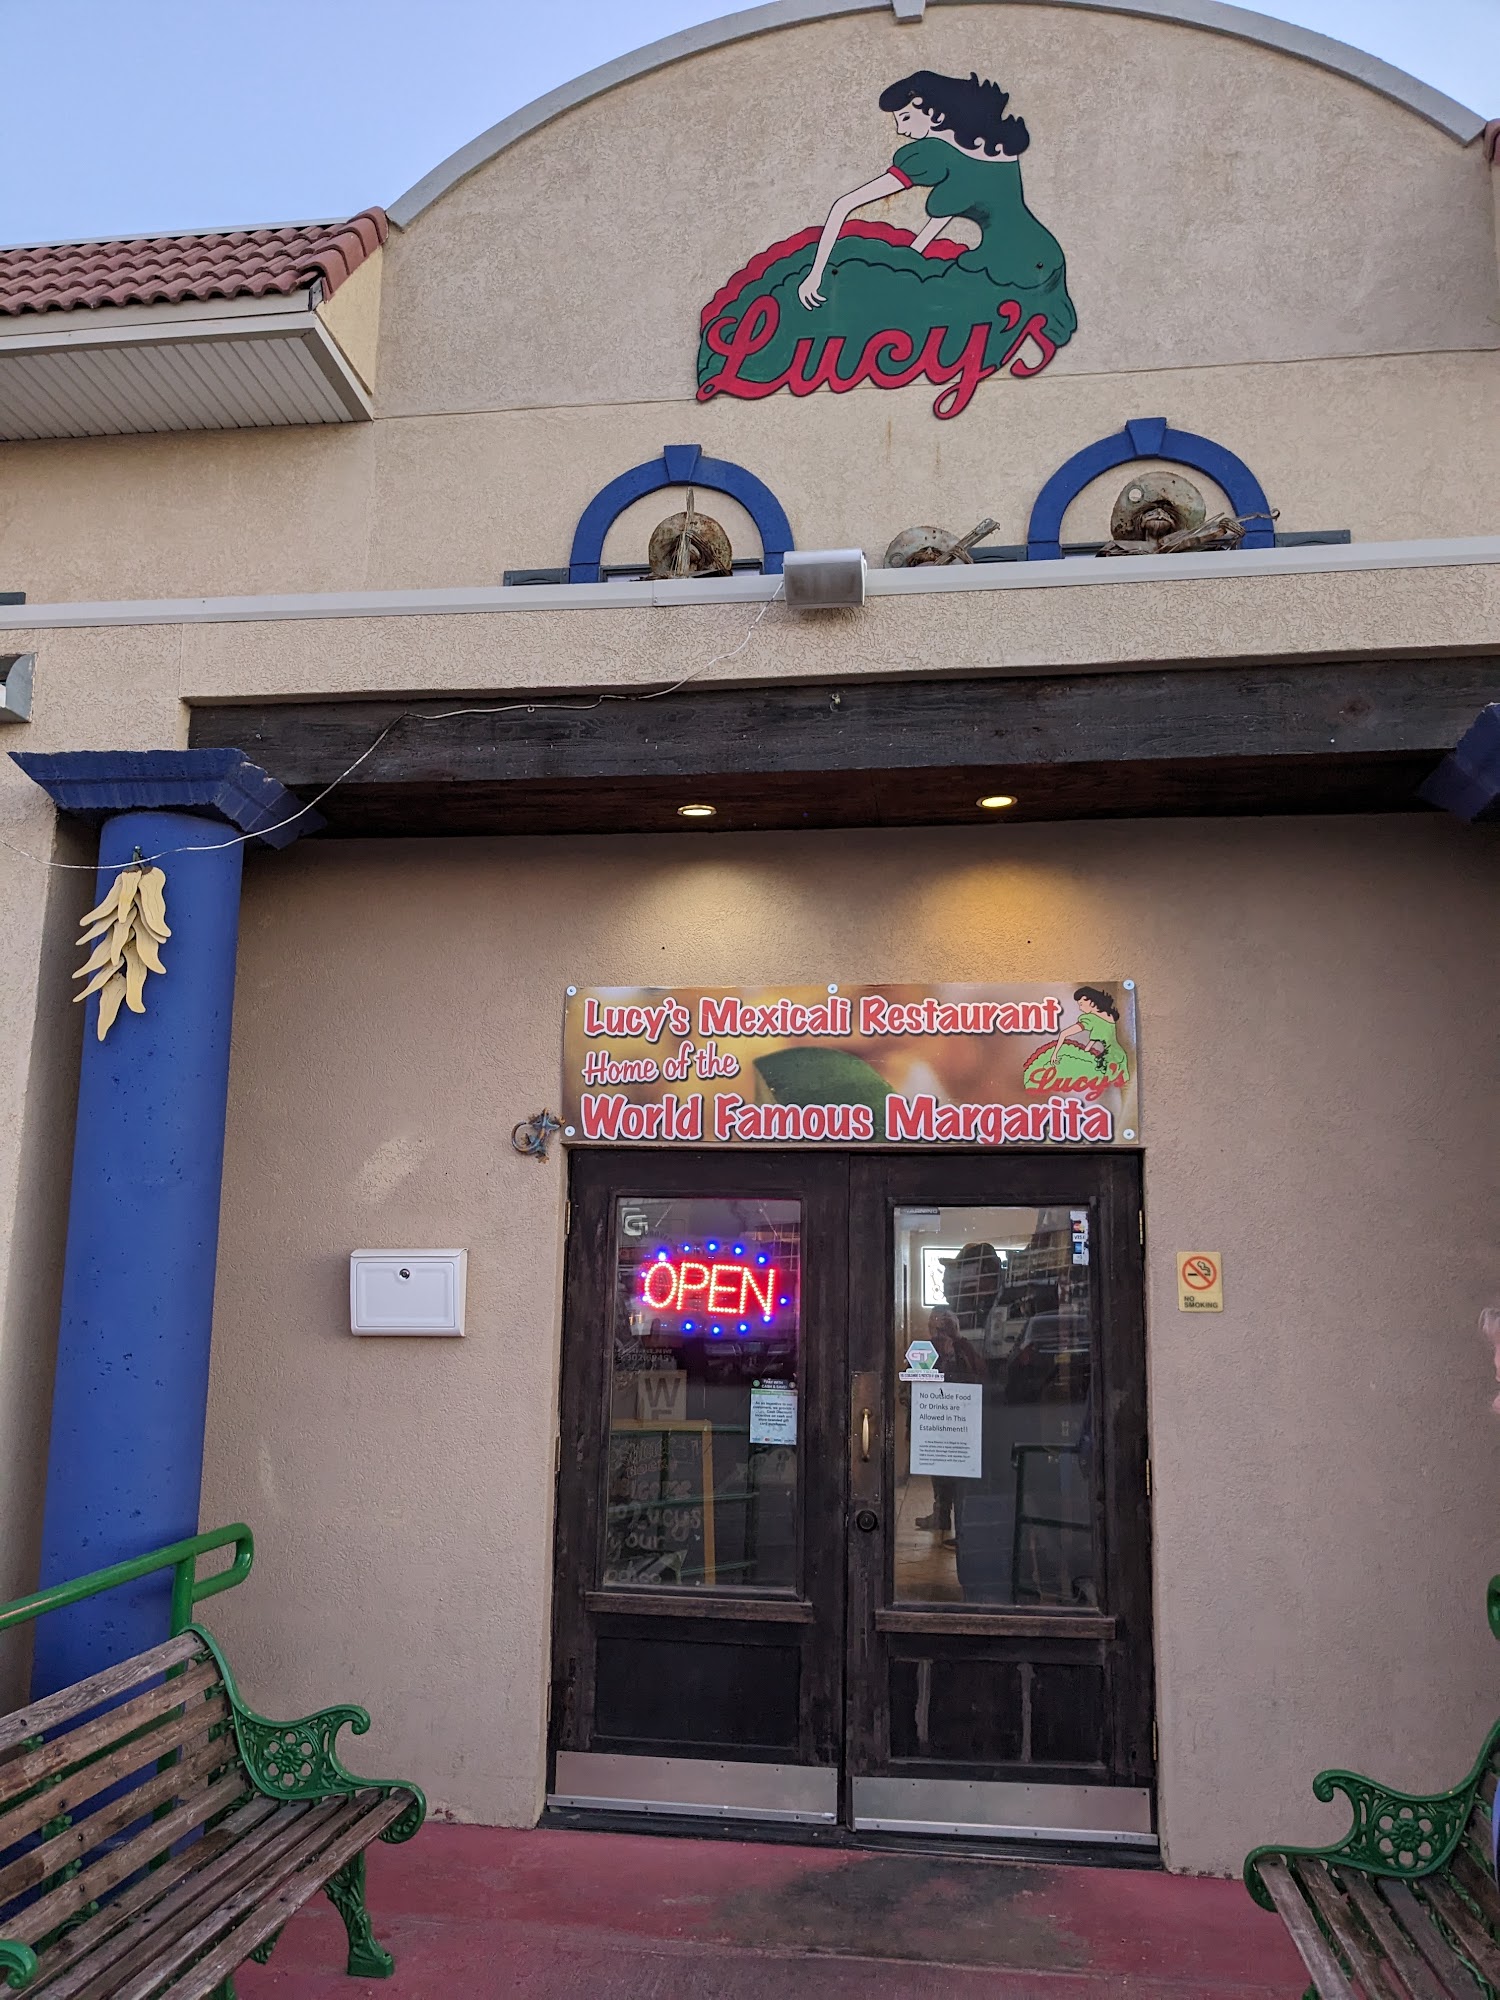 Lucy's Mexicali Restaurant